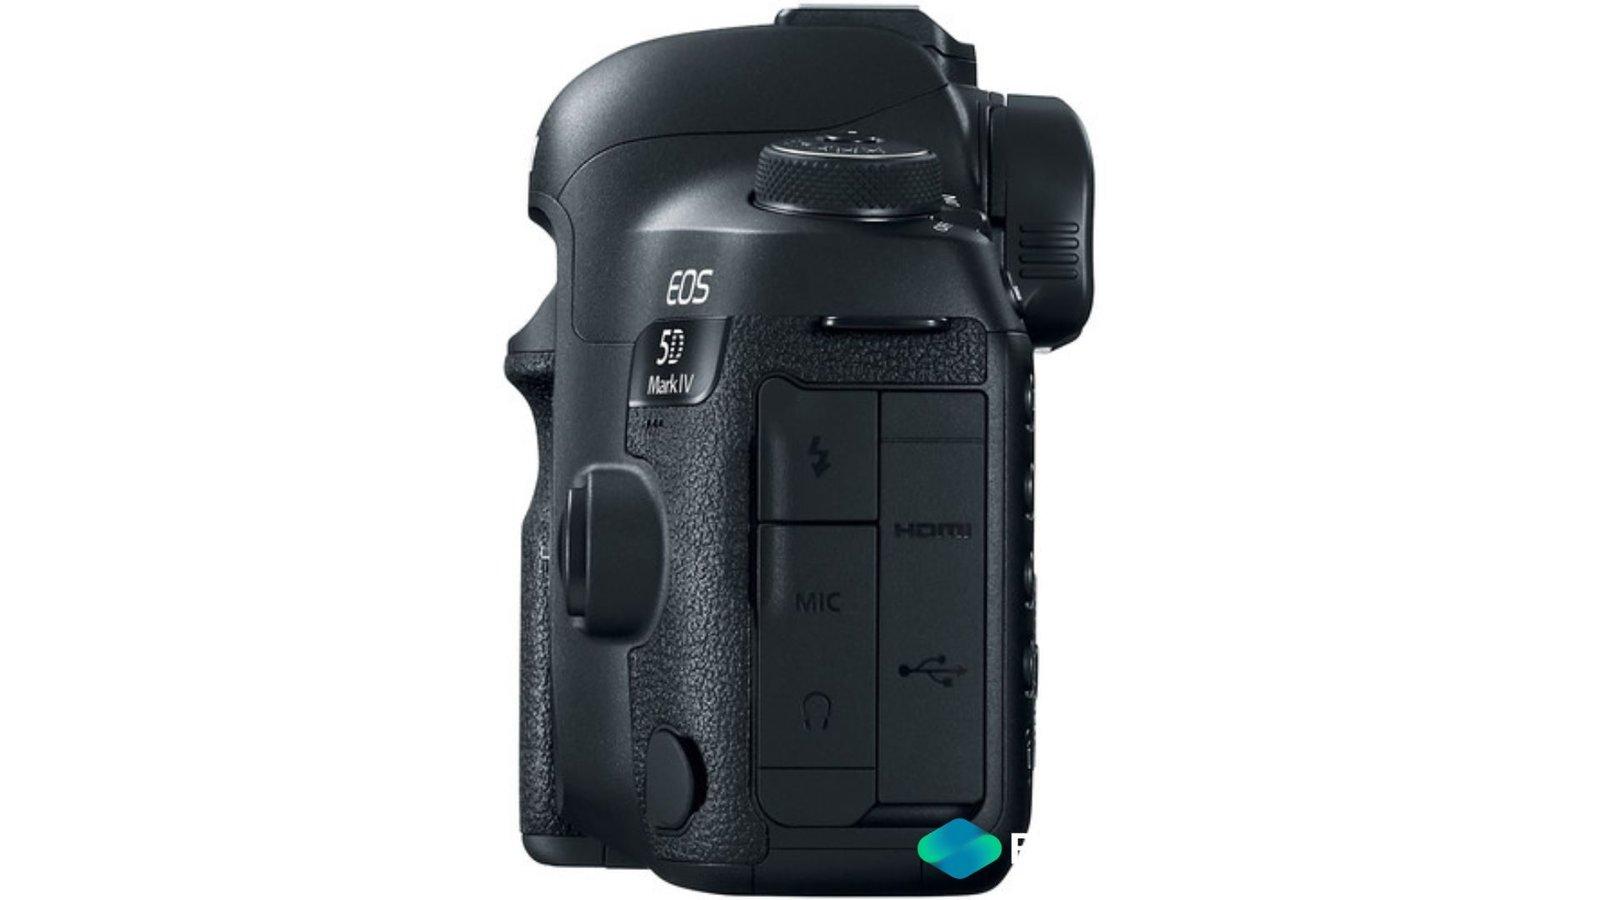 Rent Canon EOS 5D Mark IV Camera Body Lenses Kit in Delhi NCR, Camera accessories, Camera lenses for rent, in Delhi Gurgaon Noida, hire Shooting equipment, Lighting equipment rental, Film gear rental for Video production, camera rental company in Delhi, film equipment rental company